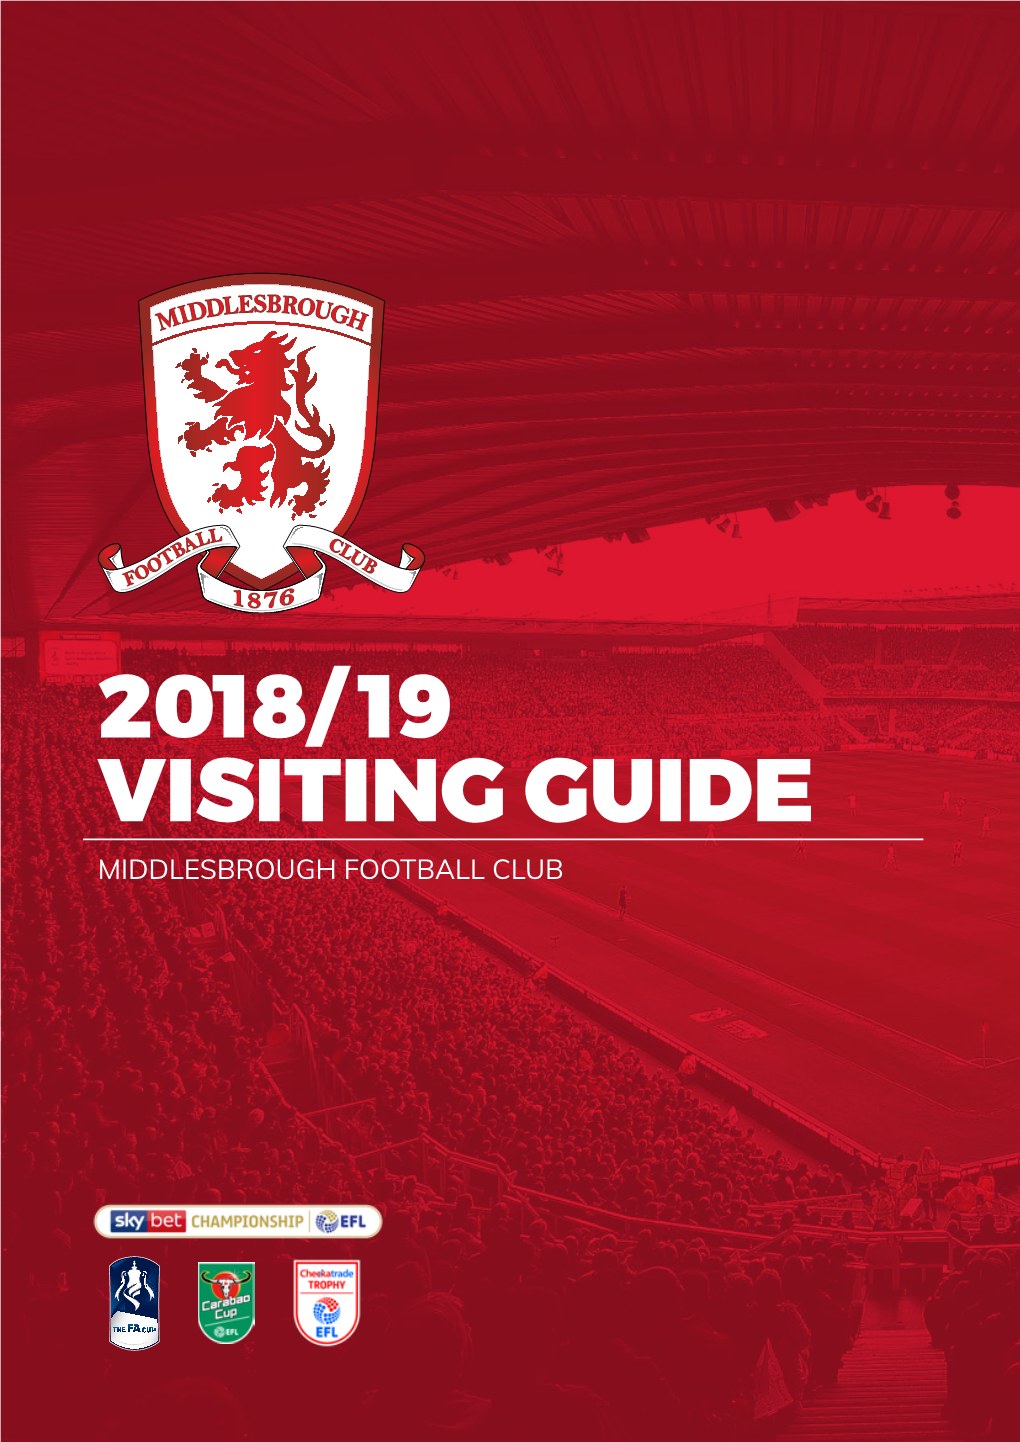 2018/ 19 Visiting Guide Middlesbrough Football Club We Would Like to Welcome You to Middlesbrough Football Club